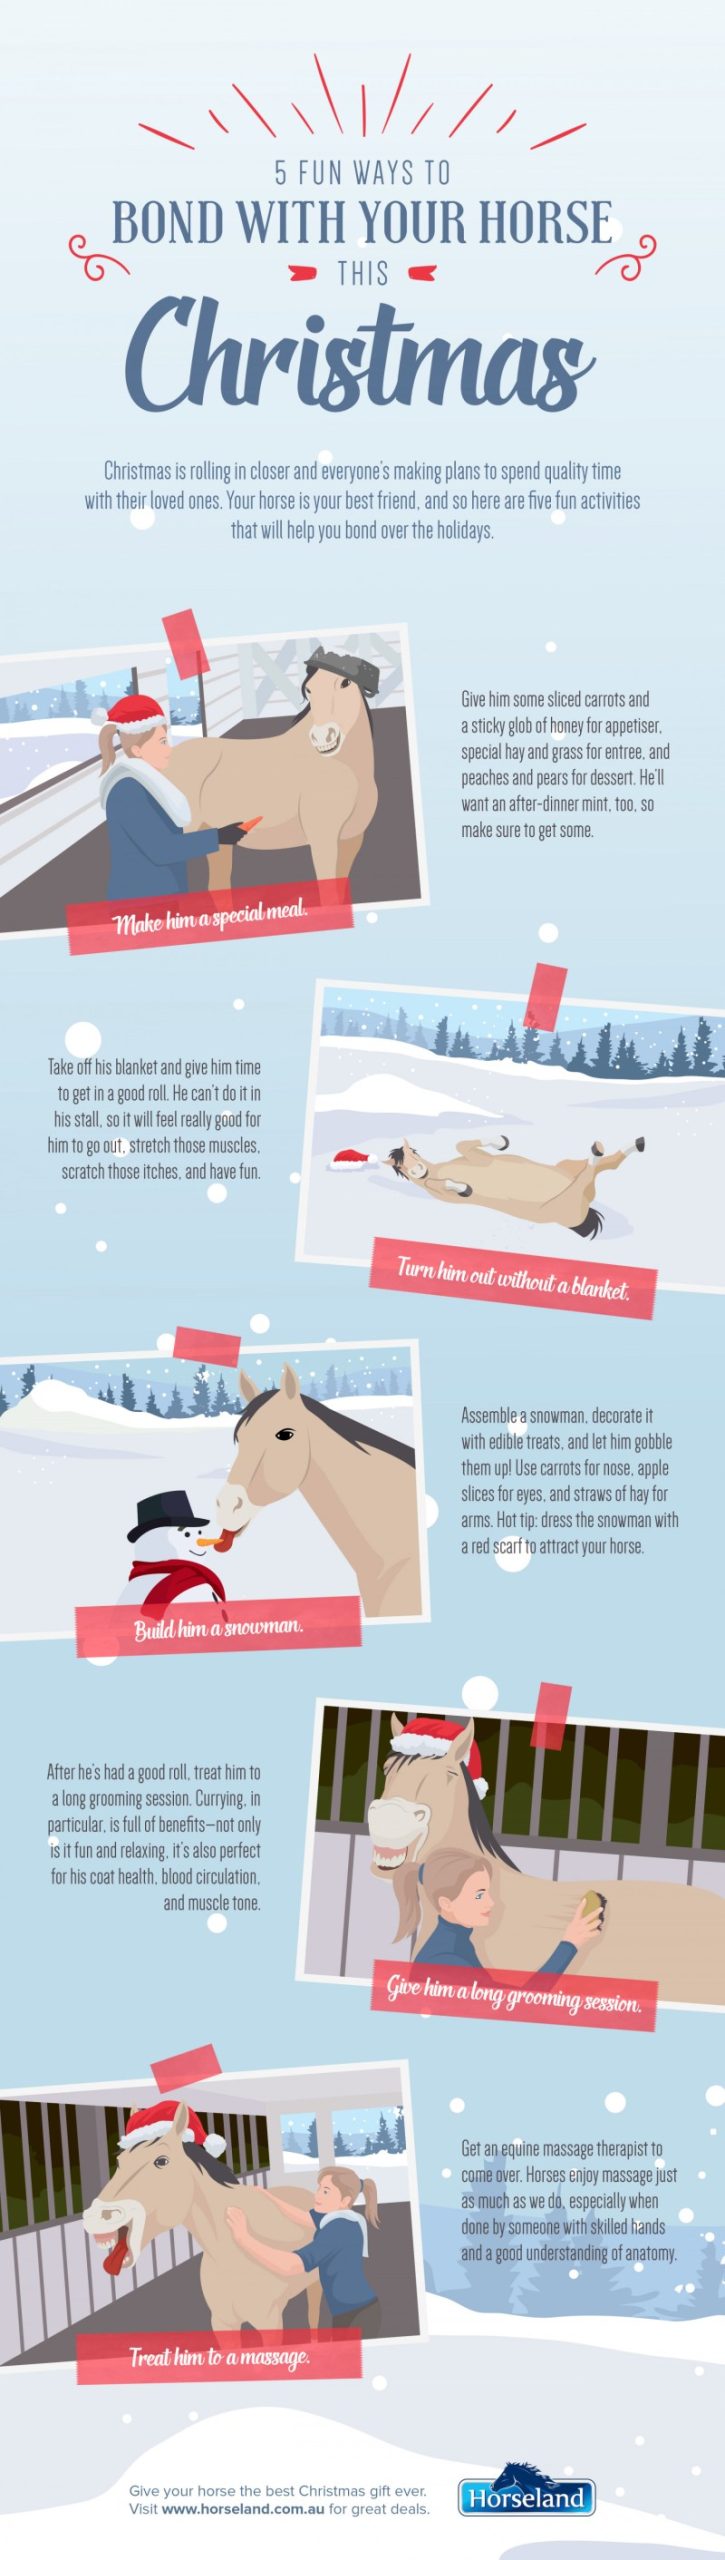 Fun Activities To Do With Your Horse